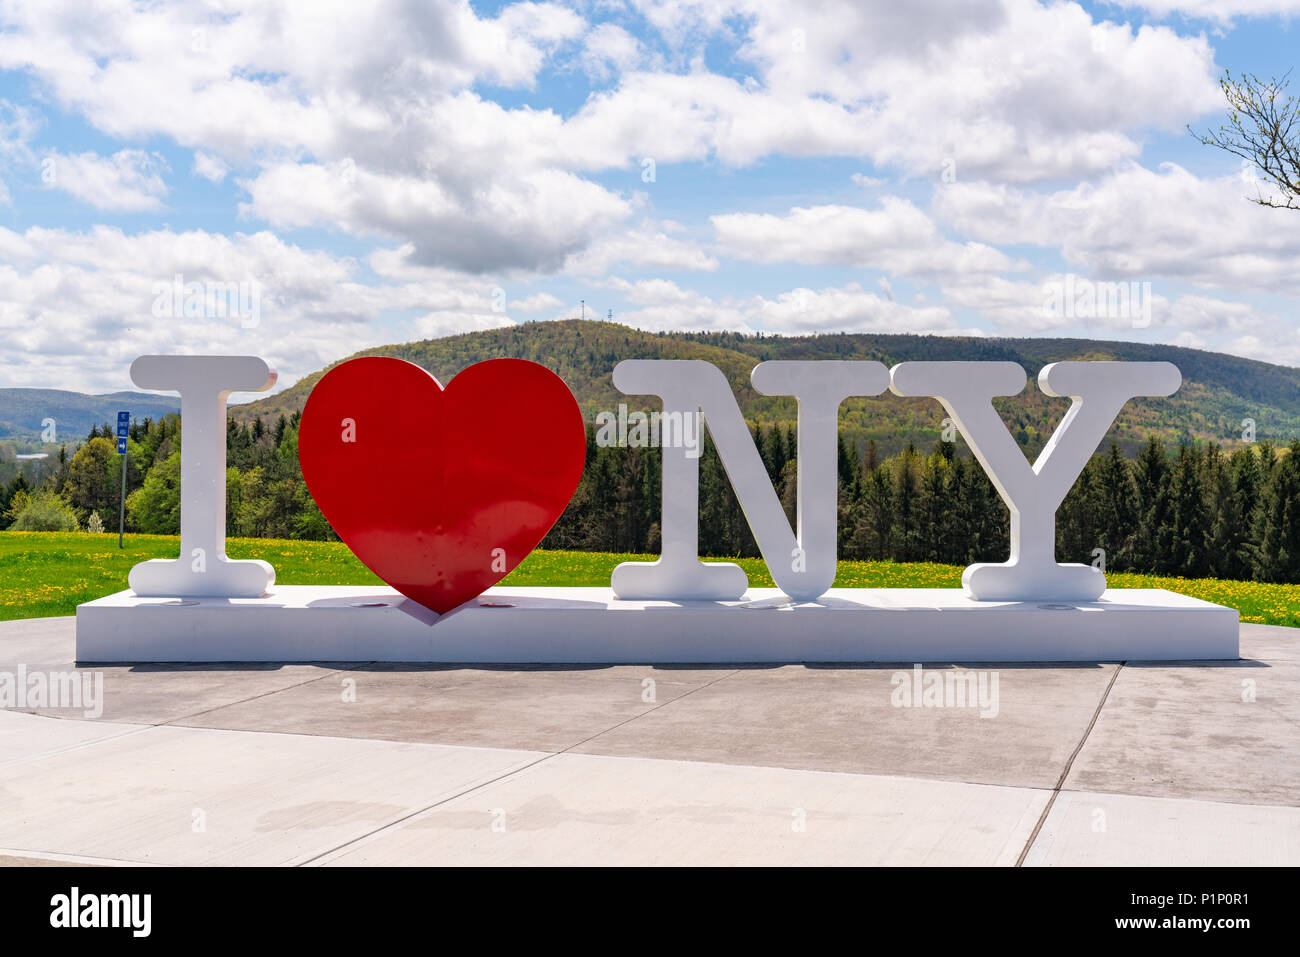 https://c8.alamy.com/comp/P1P0R1/corbettsville-ny-may-14-2018-i-love-ny-sign-at-the-new-york-southern-tier-welcome-center-P1P0R1.jpg